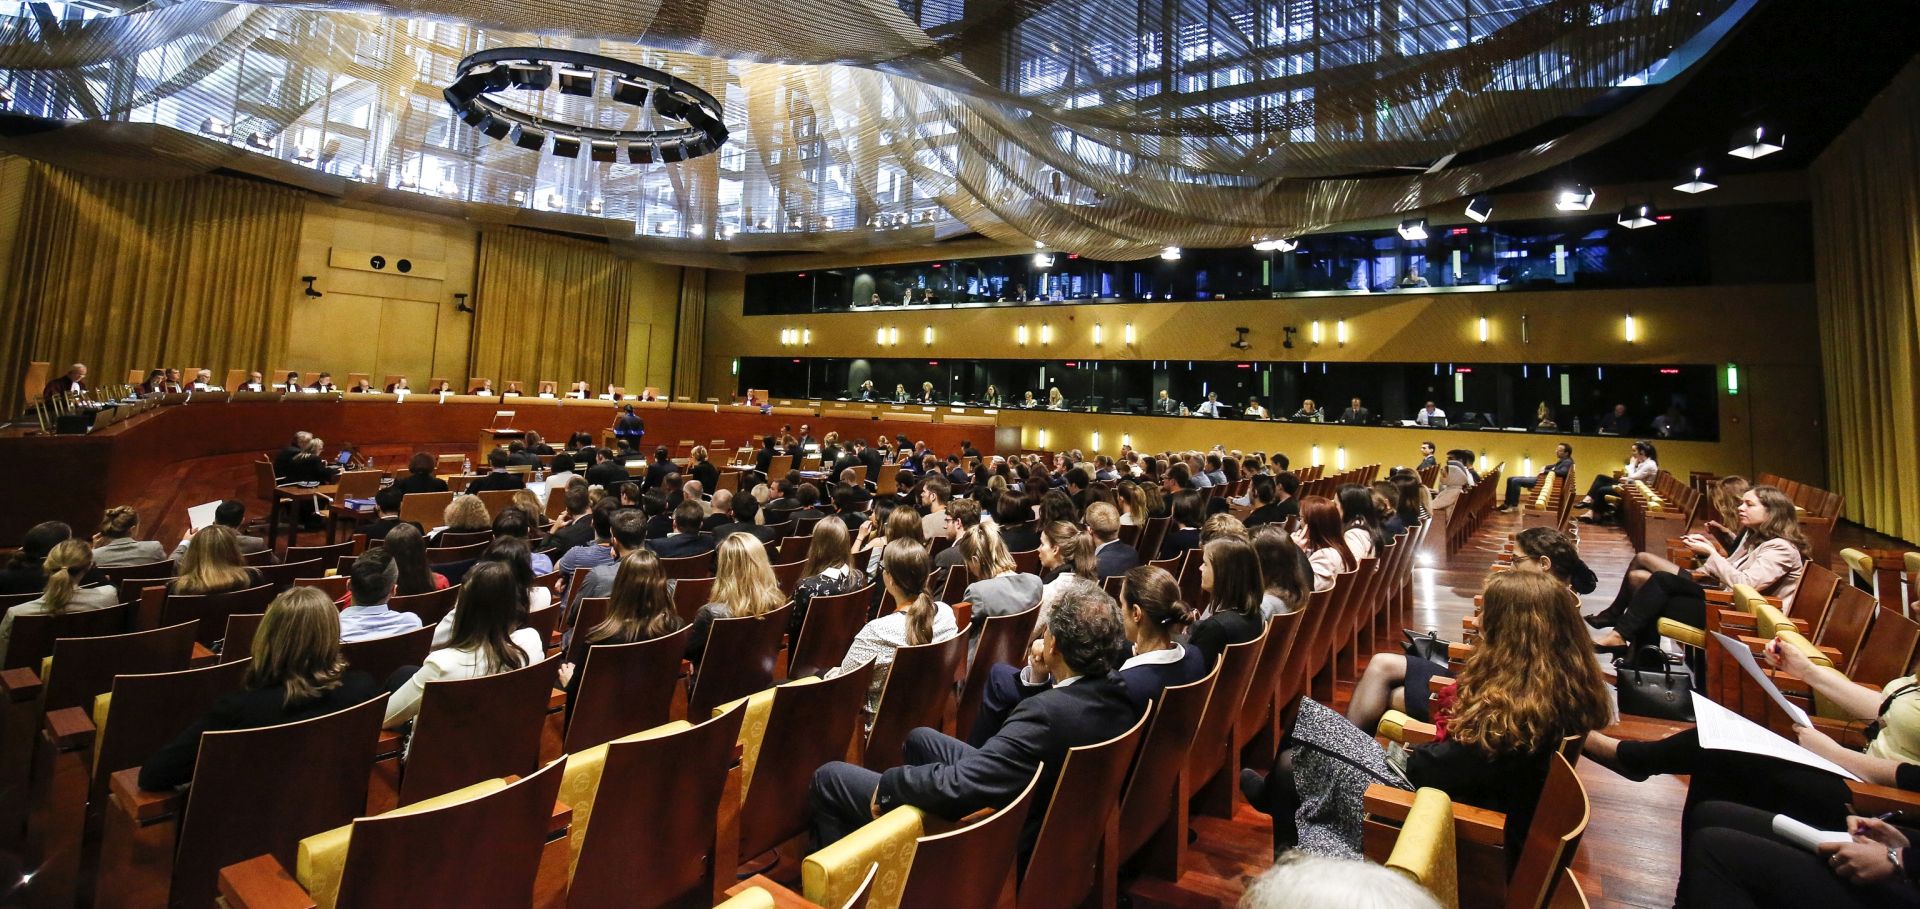 epa07207791 (FILE) - A general view of the first day of the trial on the European Union's proposed mandatory migrant quota scheme, at the Court of Justice of European Union in Luxembourg, 10 May 2017 (reissued 04 December 2018). Britain can unilaterally abandon the article 50 process without requiring the formal agreement of the European commission or other EU member states, Campos Sanchez-Bordona, the European court of justice's (ECJ) advocate general said in an statement 04 December 2018.  EPA/JULIEN WARNAND